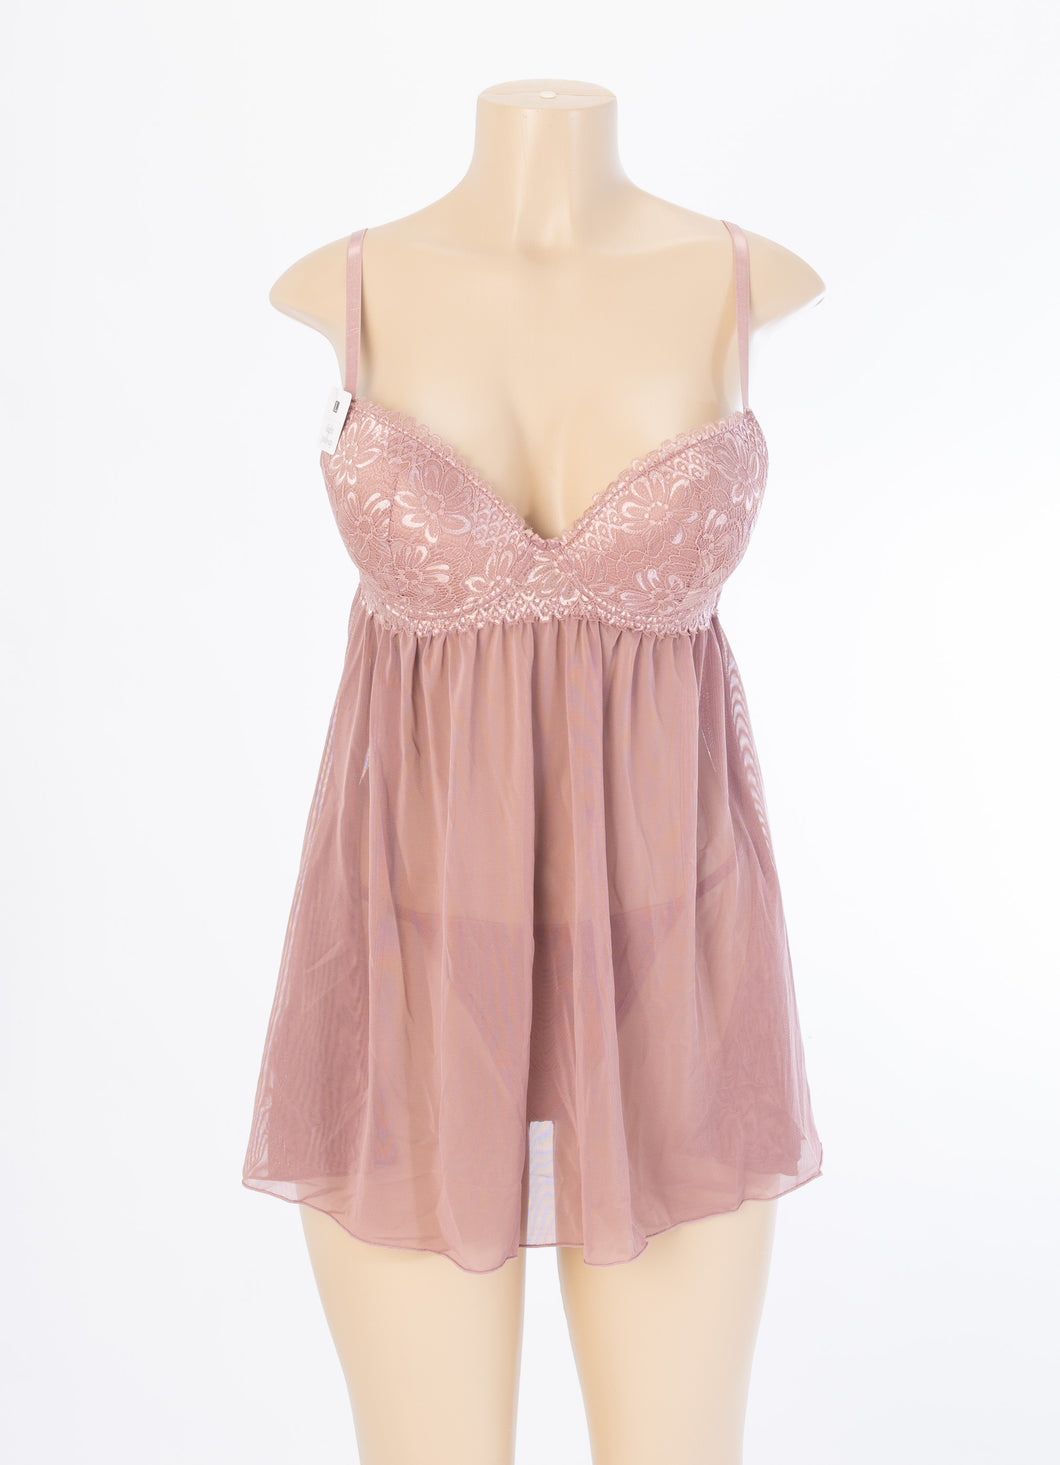 Lace Chemise With G-String